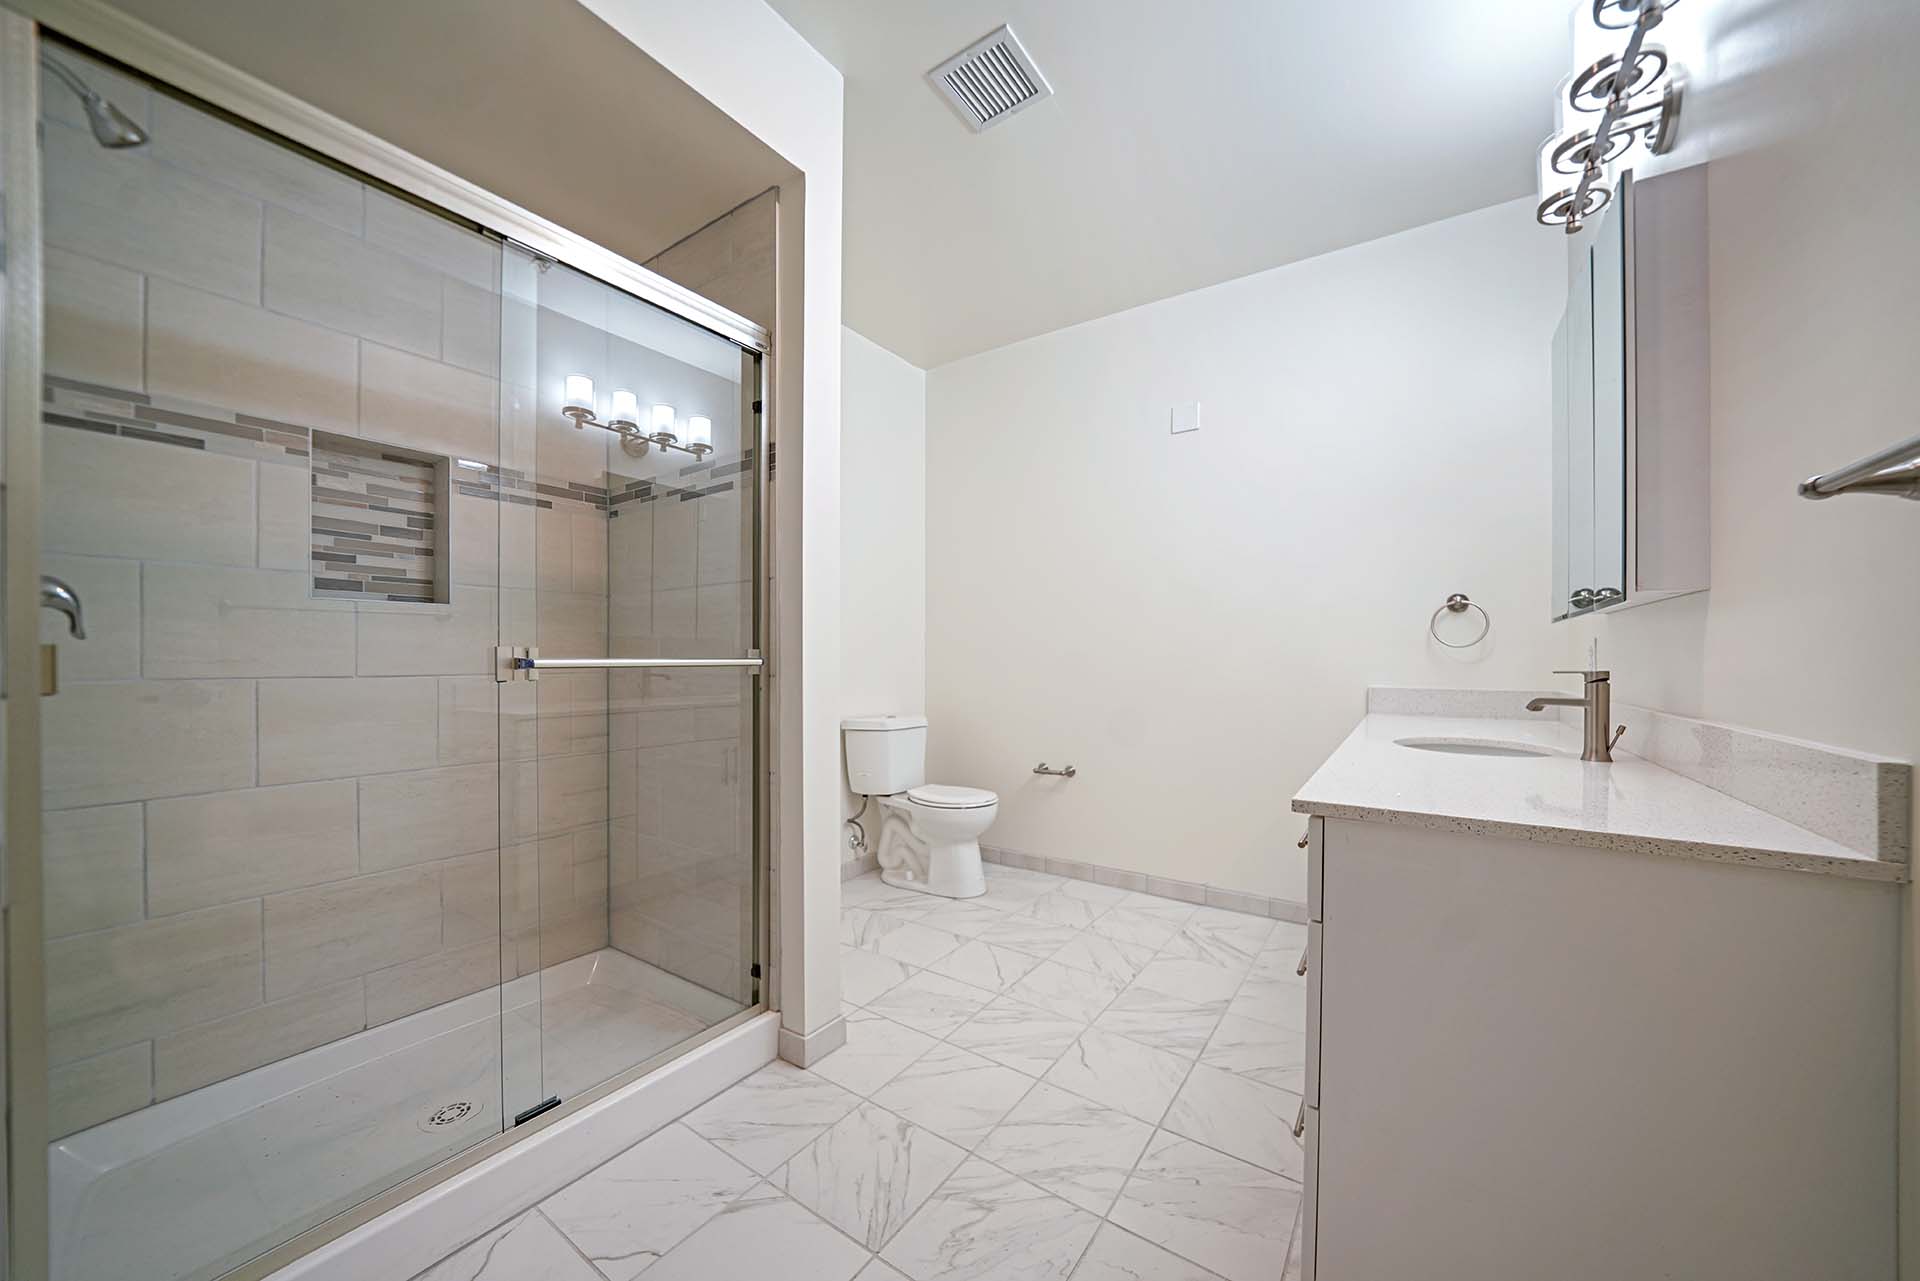 901 Market Tower interior apartment bathroom with stall shower